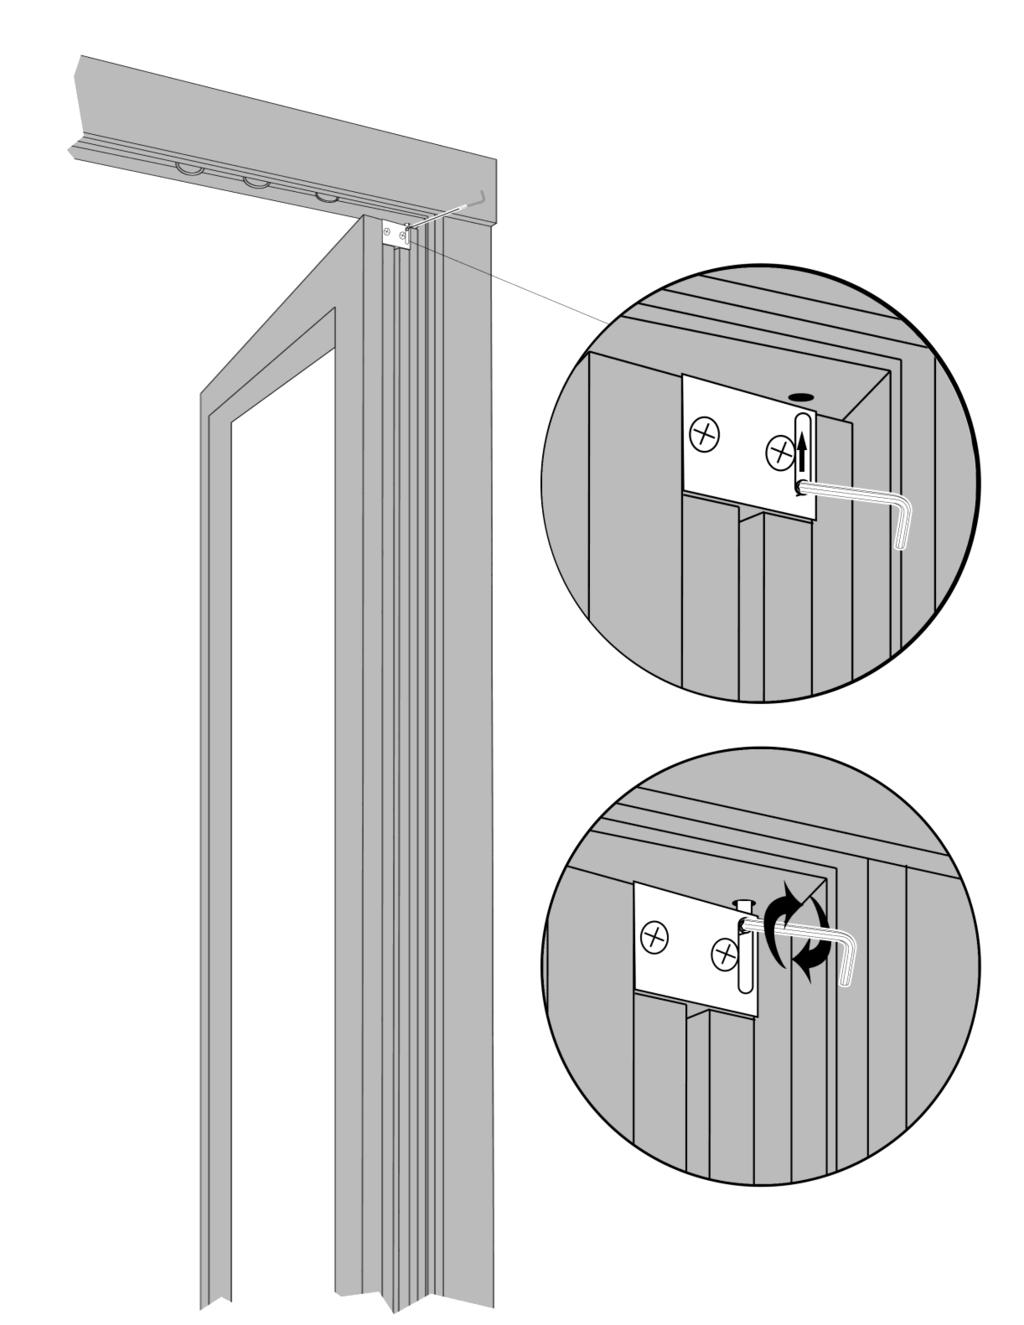 Inserting Active Swing Door Top Hinge Pin 11 1. Unscrew & Pull out the Pivot Block. 2. Place door in bottom Pivot 3.